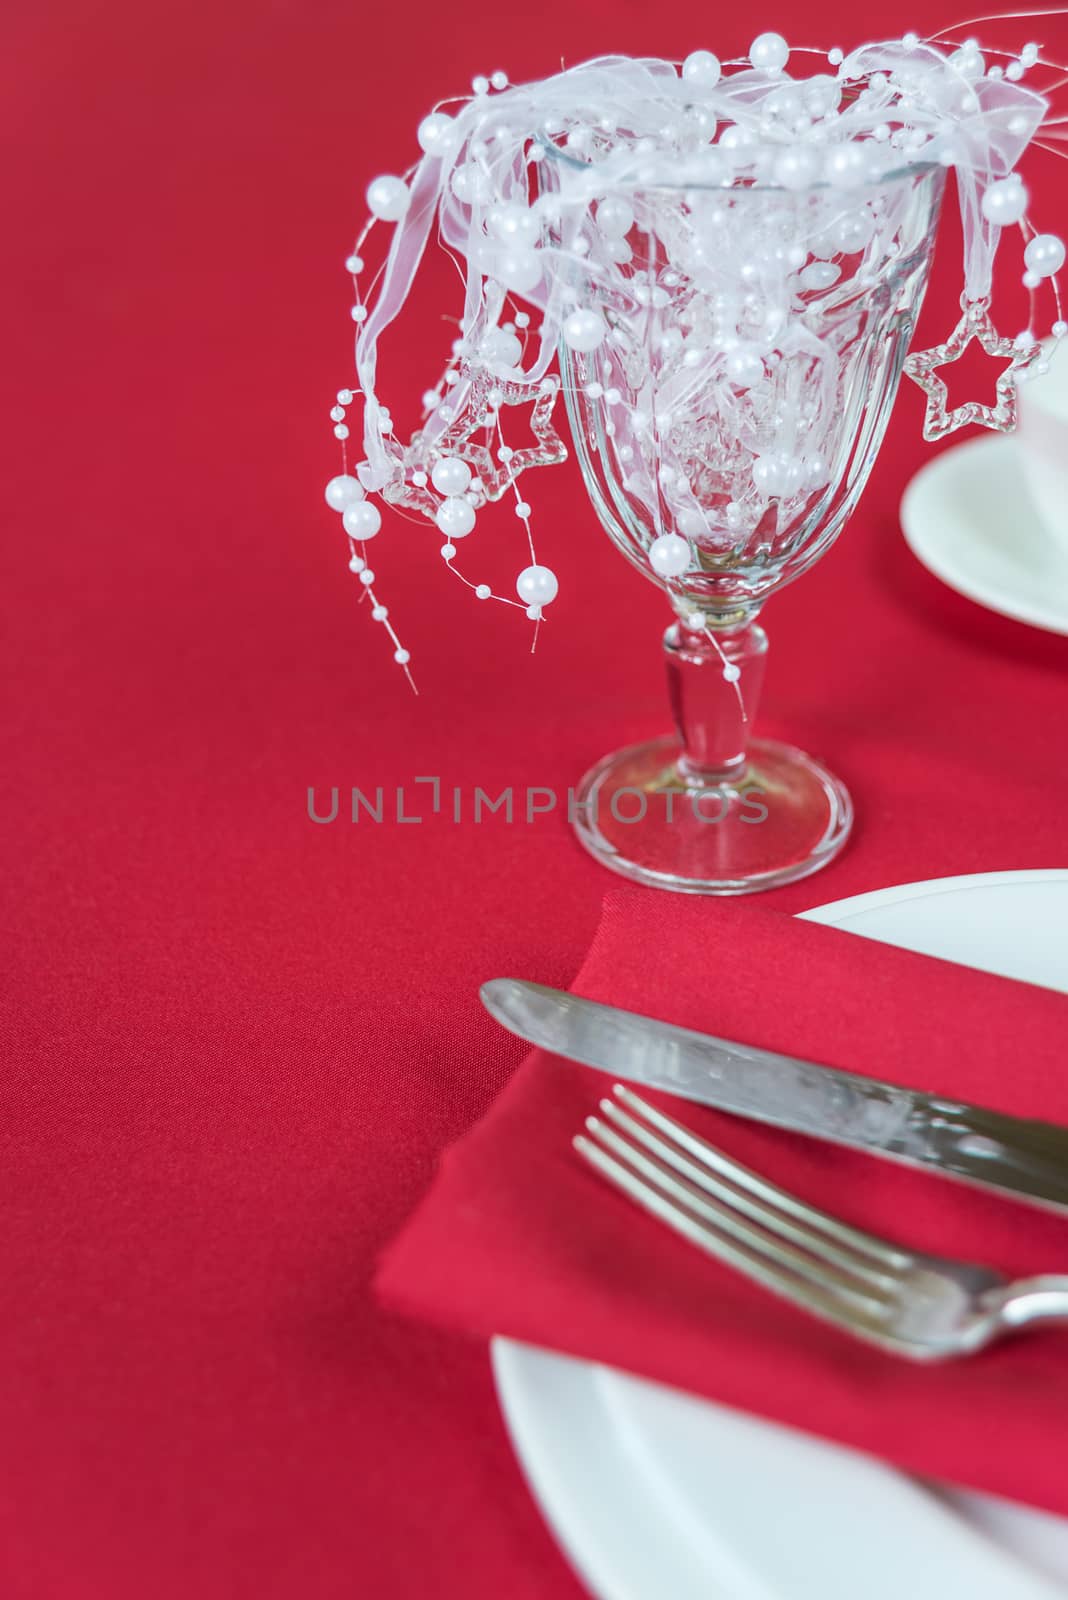 Silver knife and fork lie on the red linen napkin, as well as wineglass, which is located on a table covered with a red tablecloth, with space for text